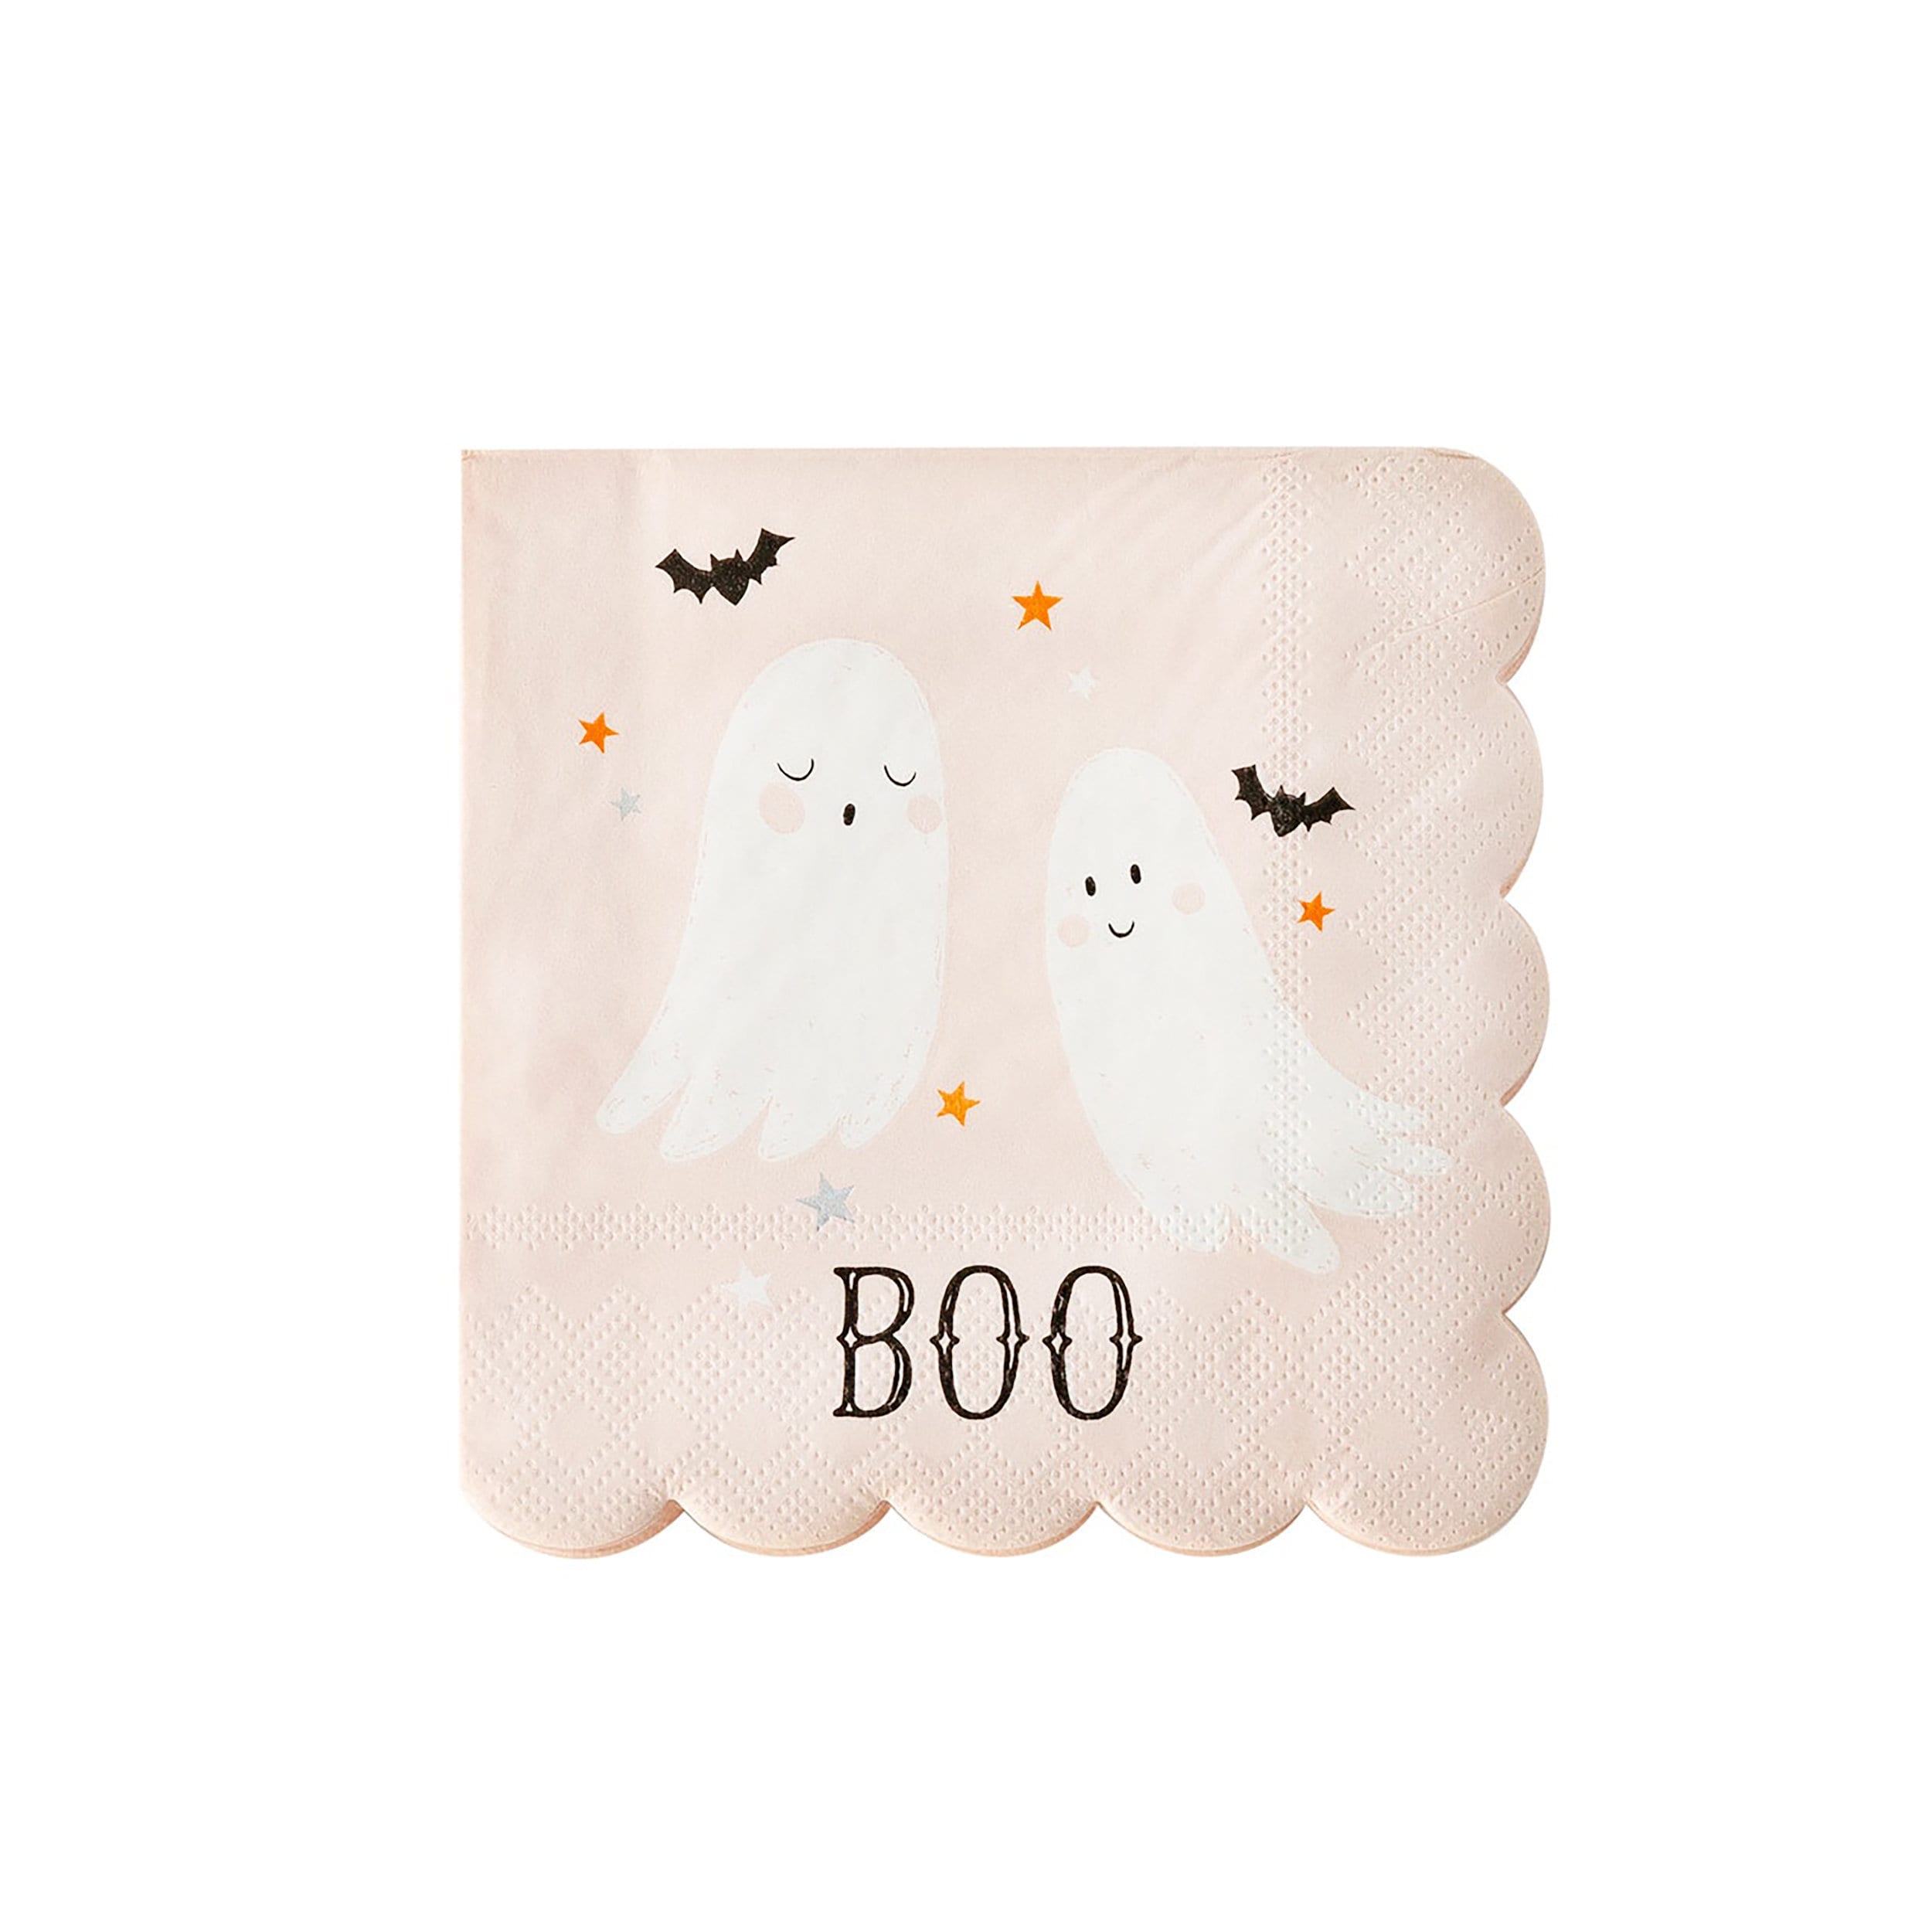 Ghost Napkins | Ghost Party - Halloween Paper Napkin - Halloween Tableware - Halloween Party Napkins - Boo Bash - Halloween Napkins